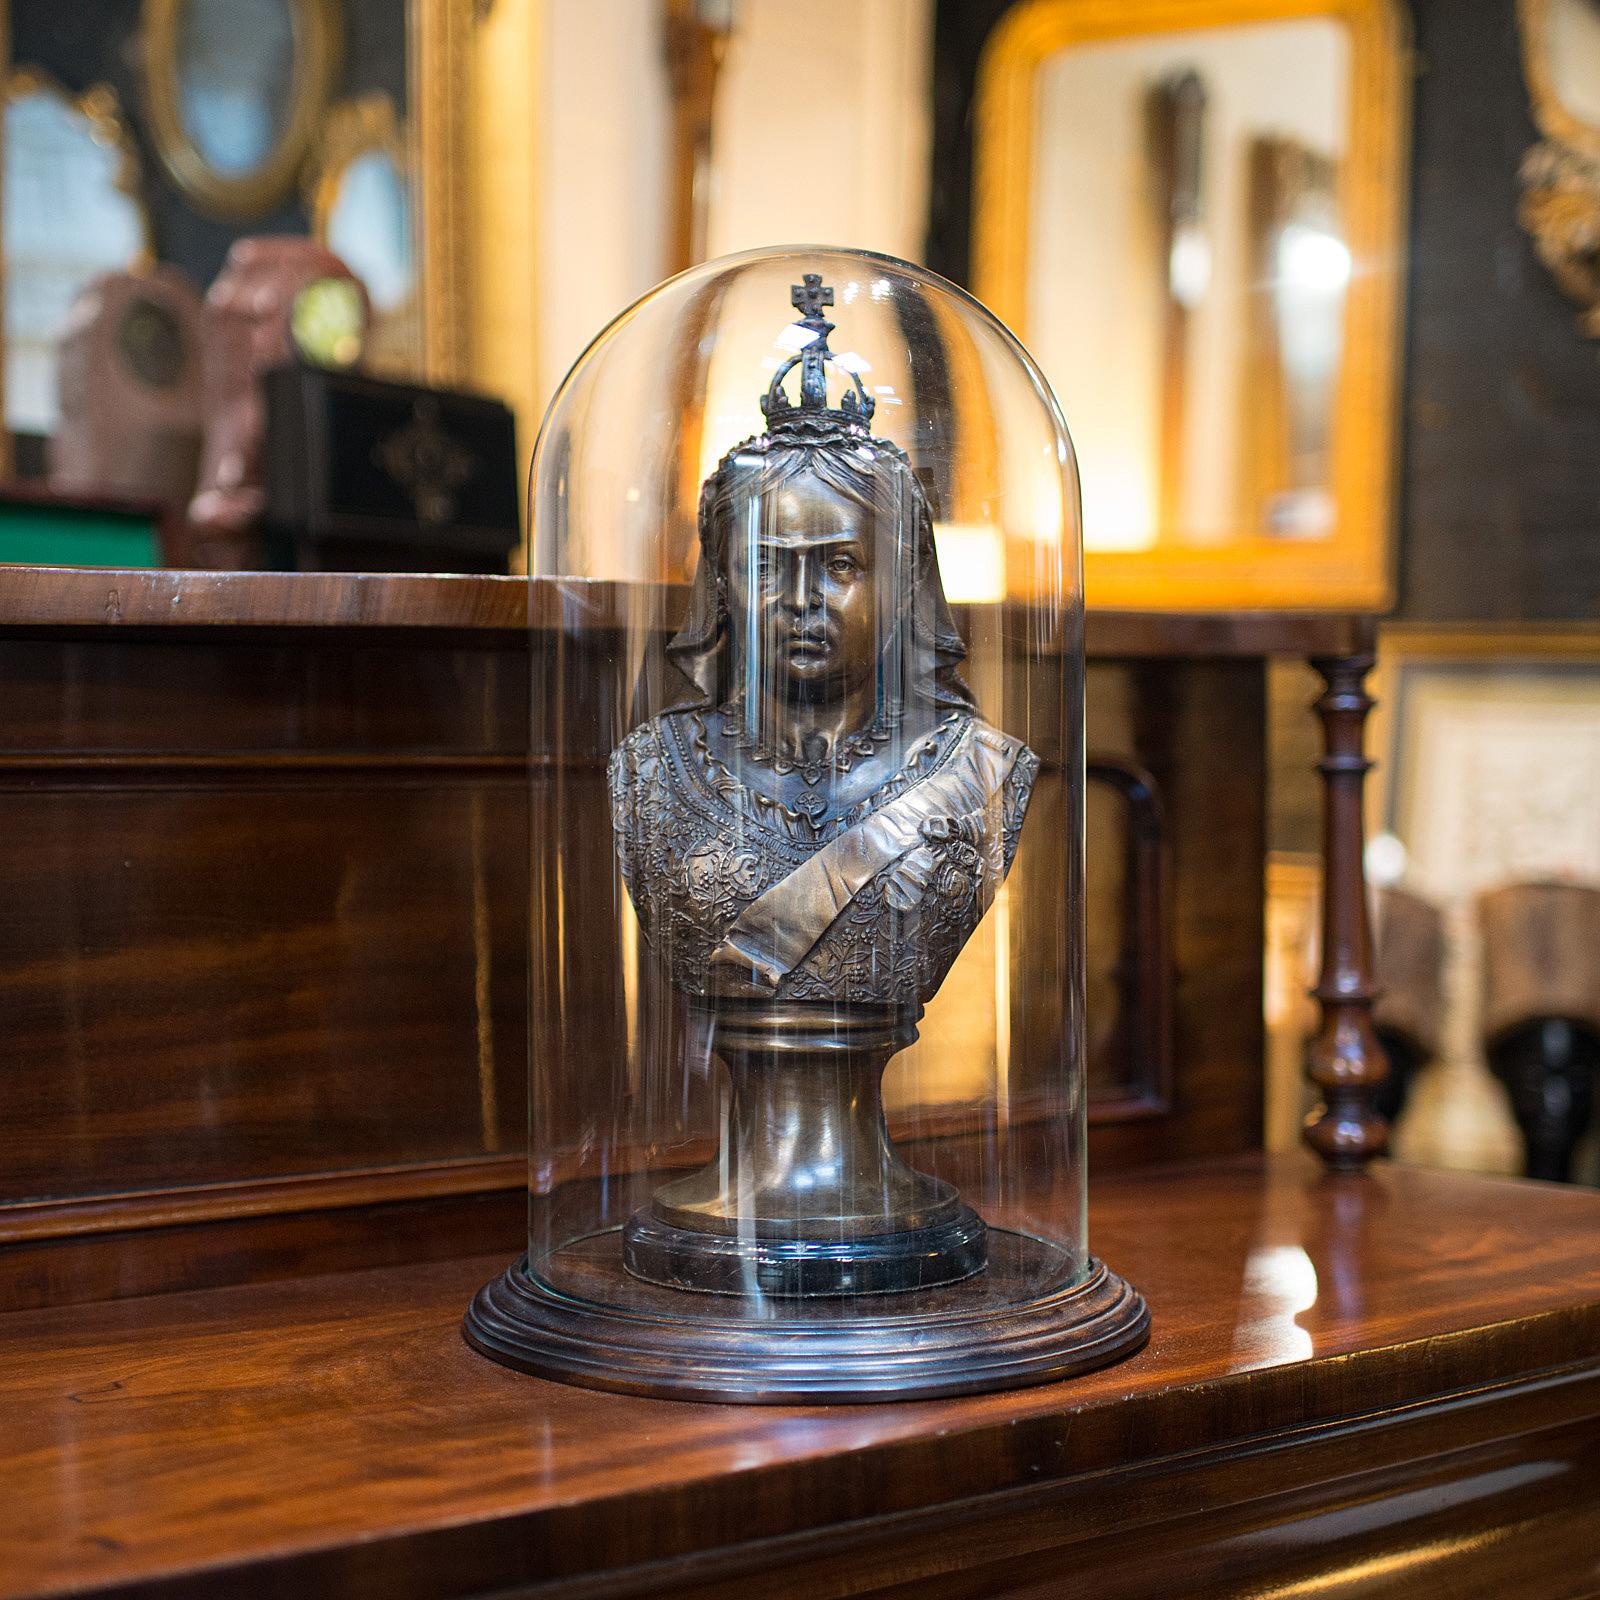 This is an antique display dome. An English, glass and mahogany taxidermy showcase, dating to the Victorian period, circa 1900.

Showcase your treasured items within Victorian glass
Displaying a desirable aged patina - free of marks or